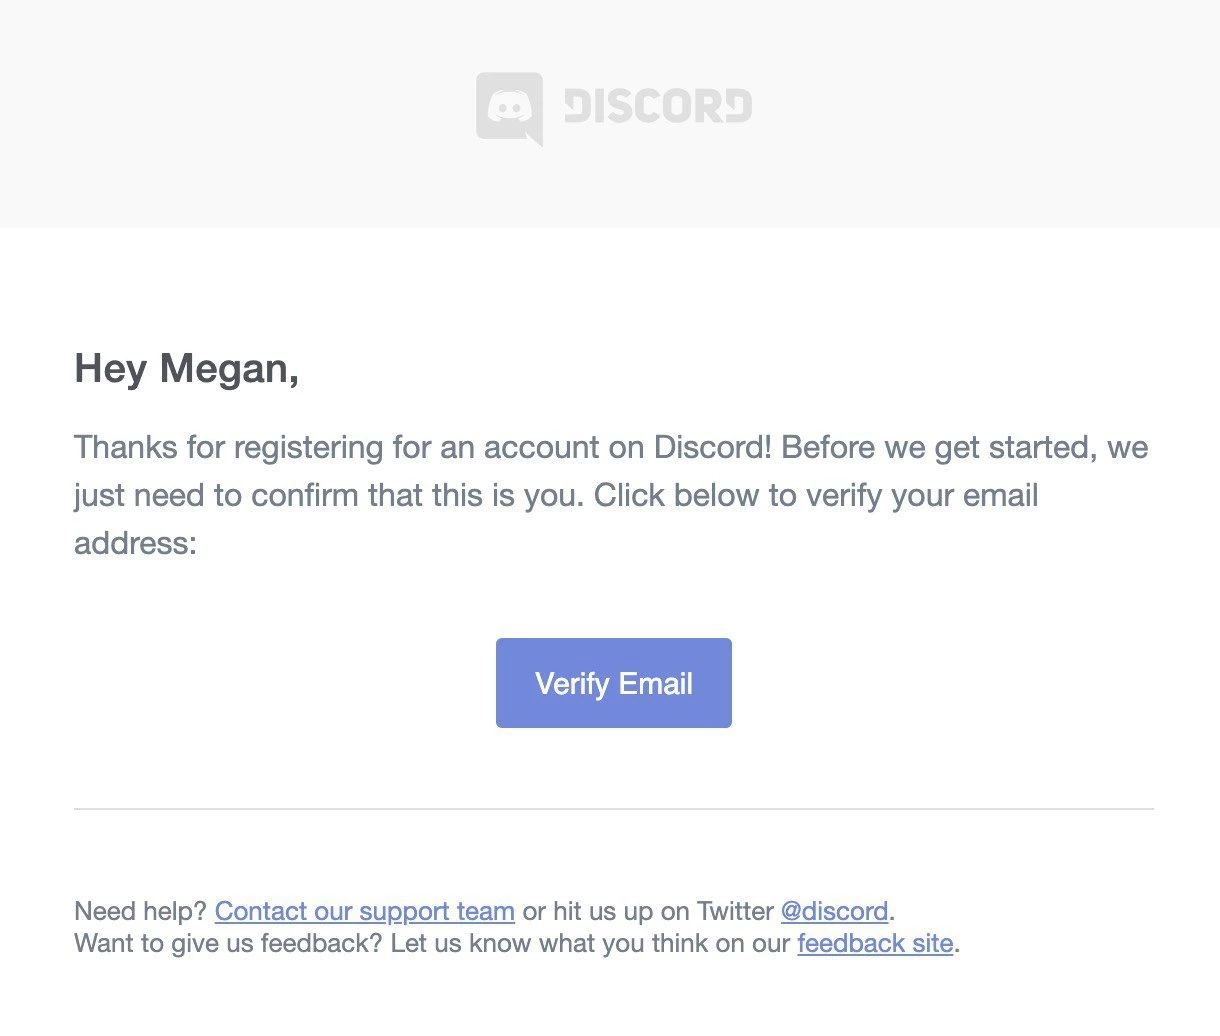 discord email address verification transactional email